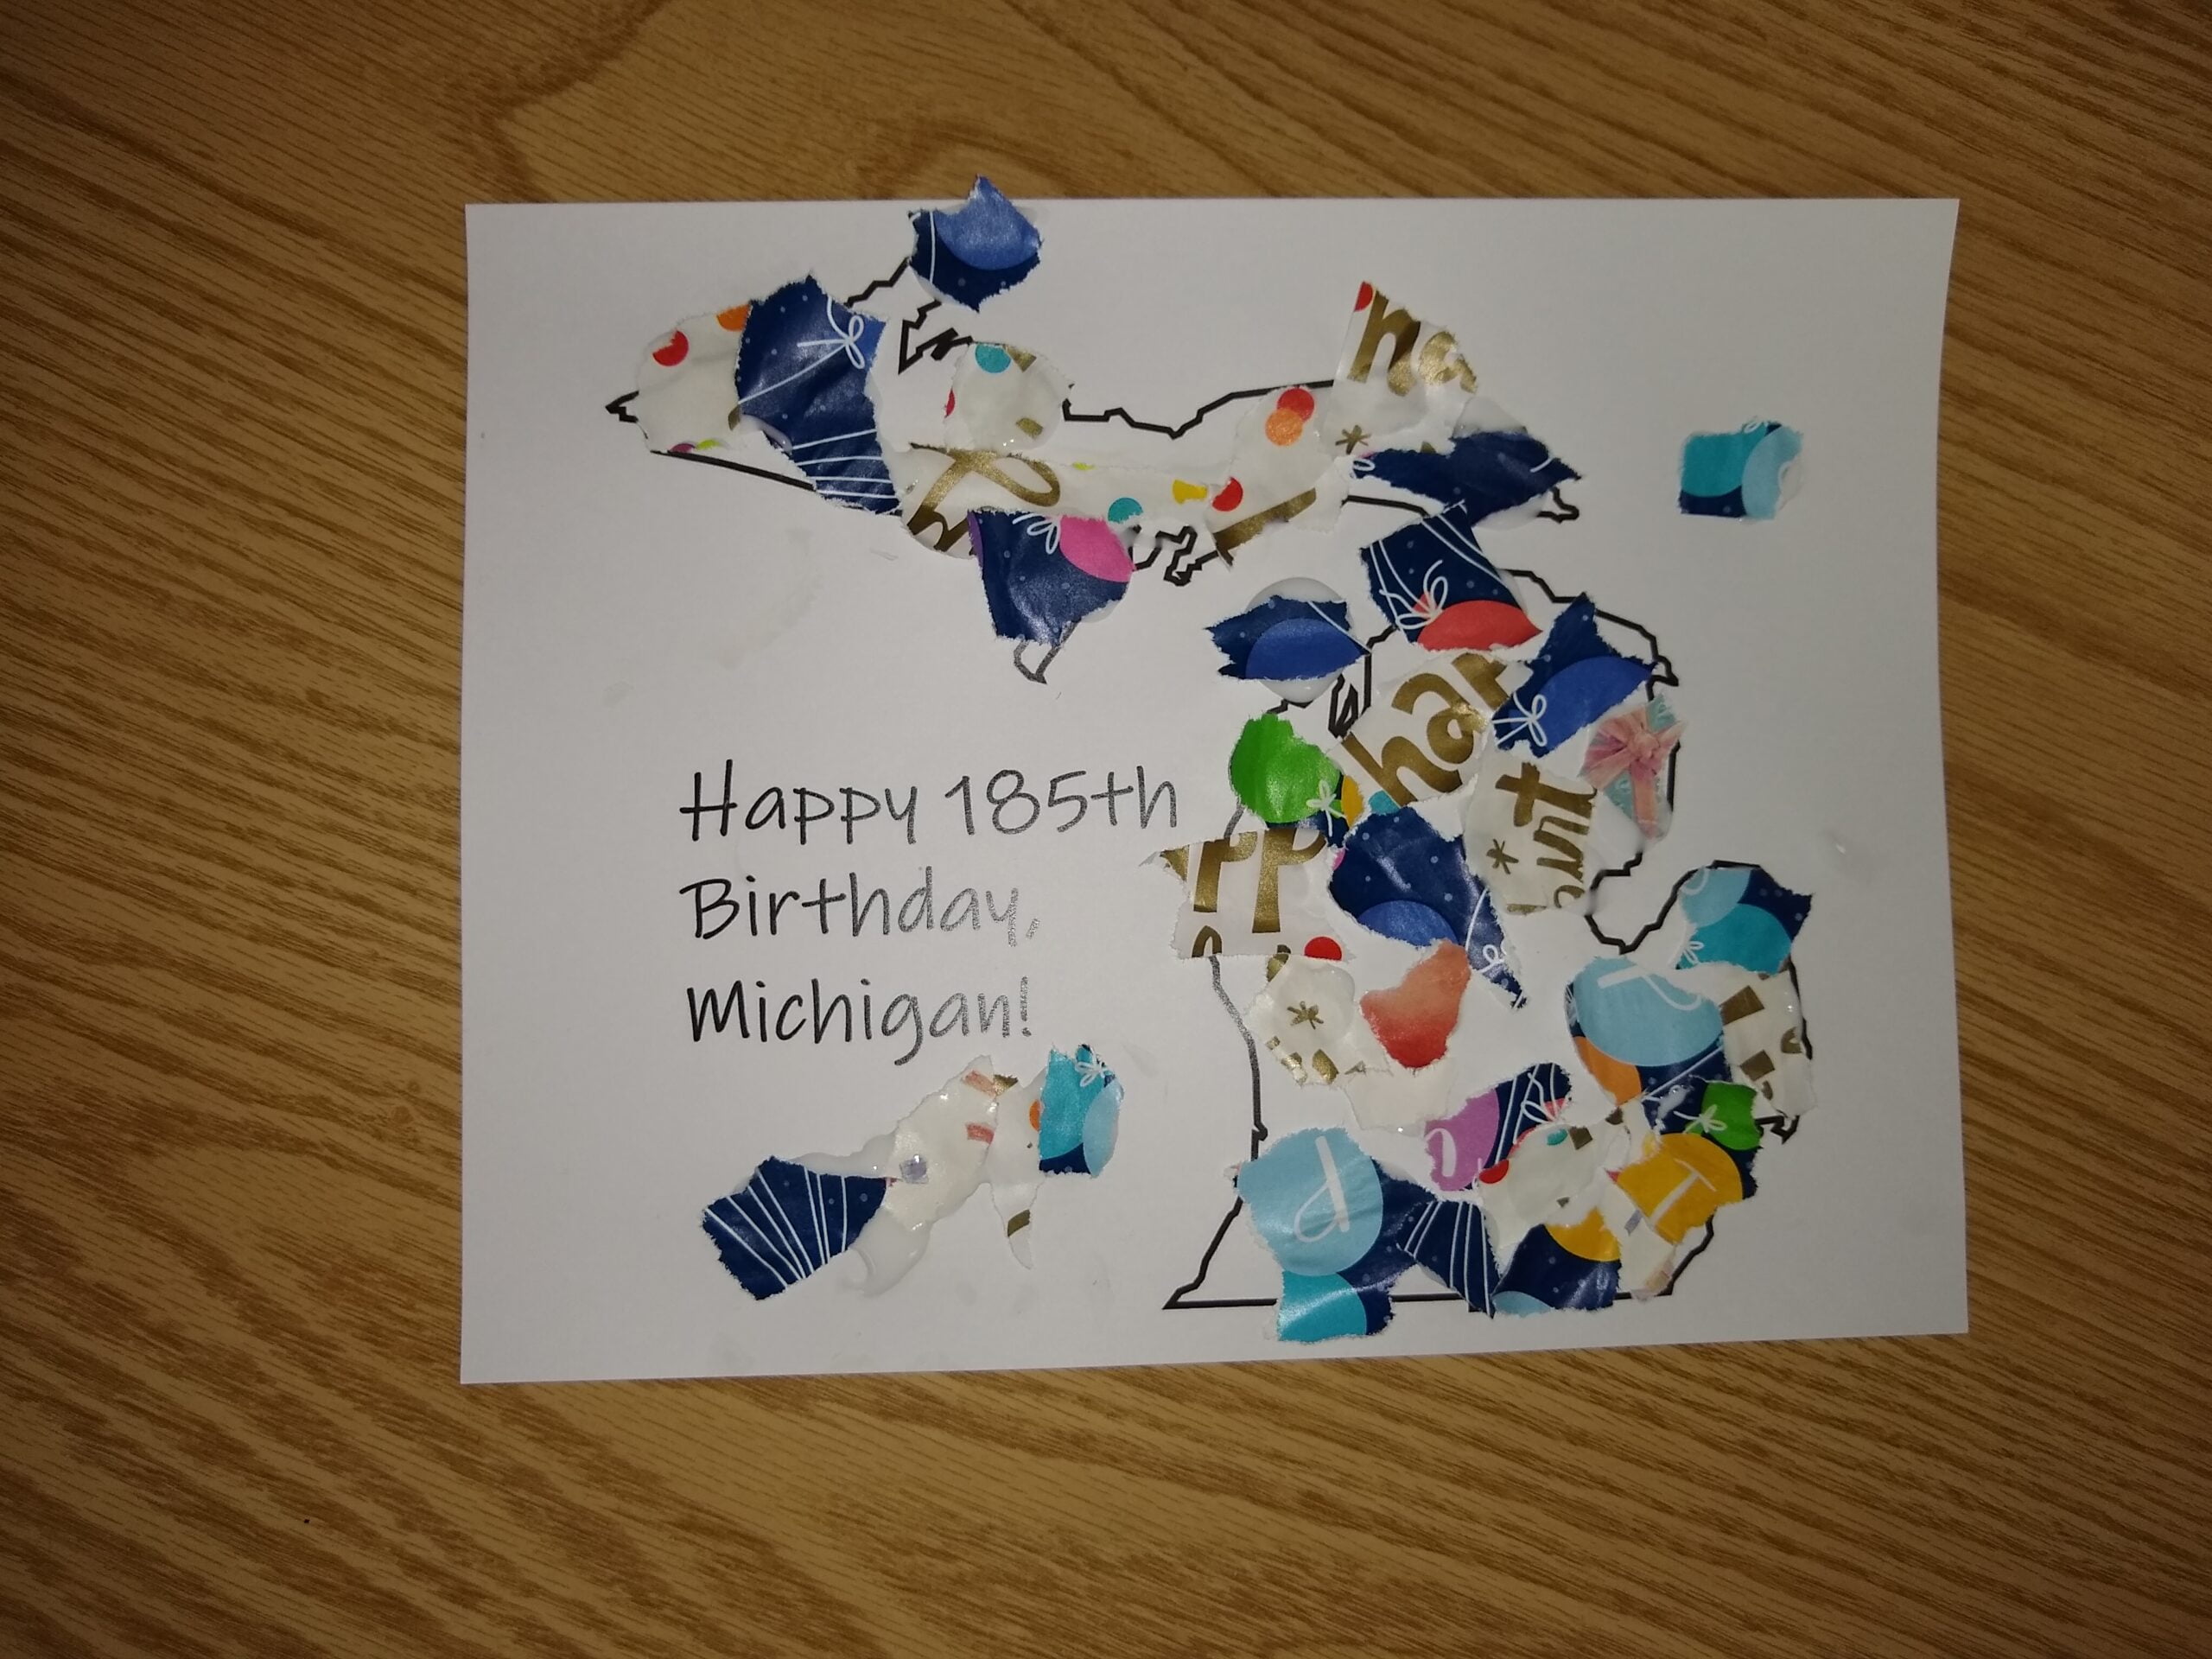 185th Birthday card for Michigan with scraps of Birthday Wrapping paper blued to the outline of Michigan.